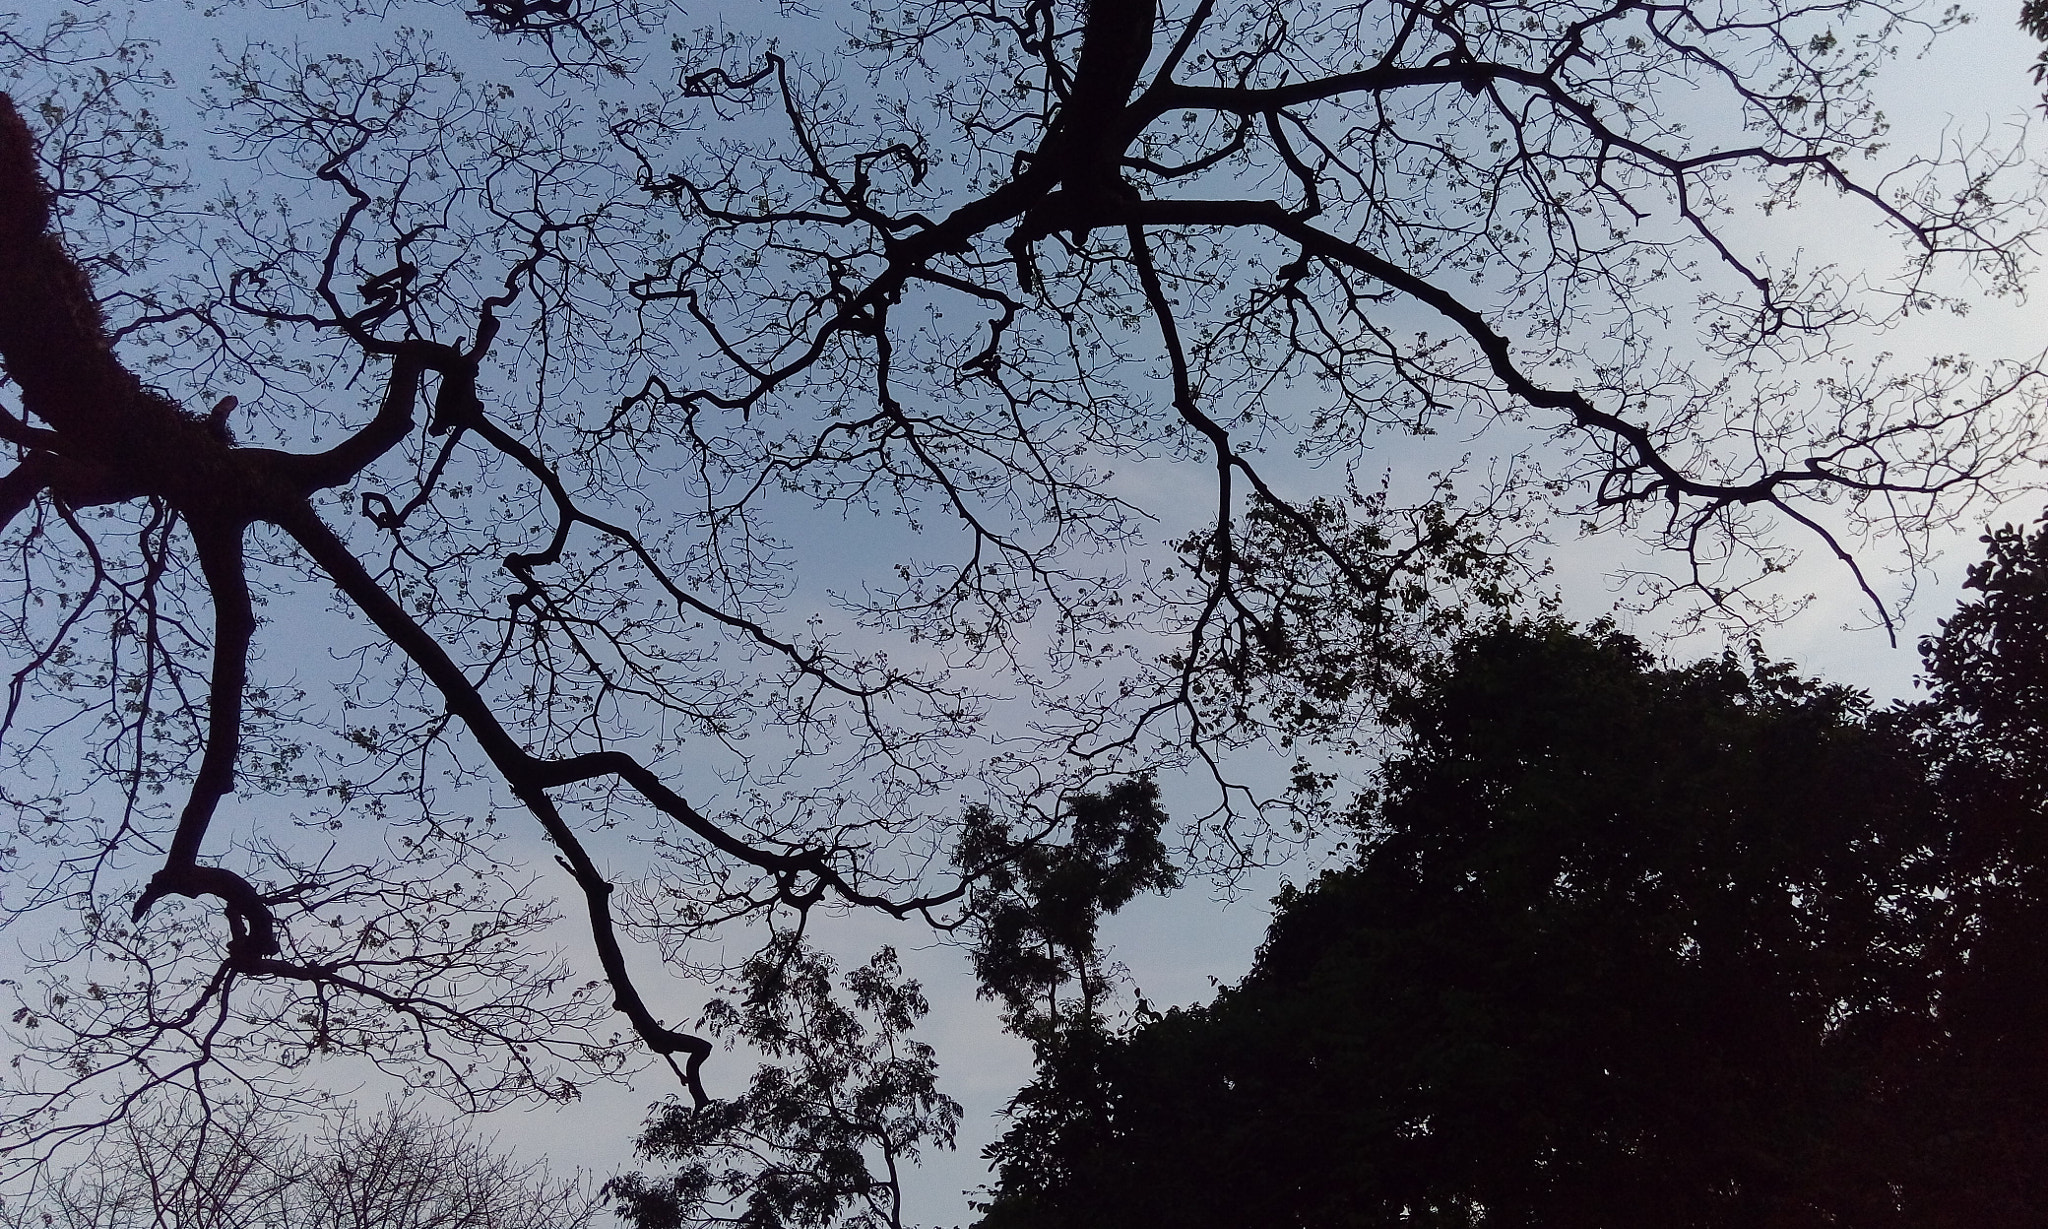 HTC DESIRE 626G+ DUAL SIM sample photo. The branches of an oak tree photography